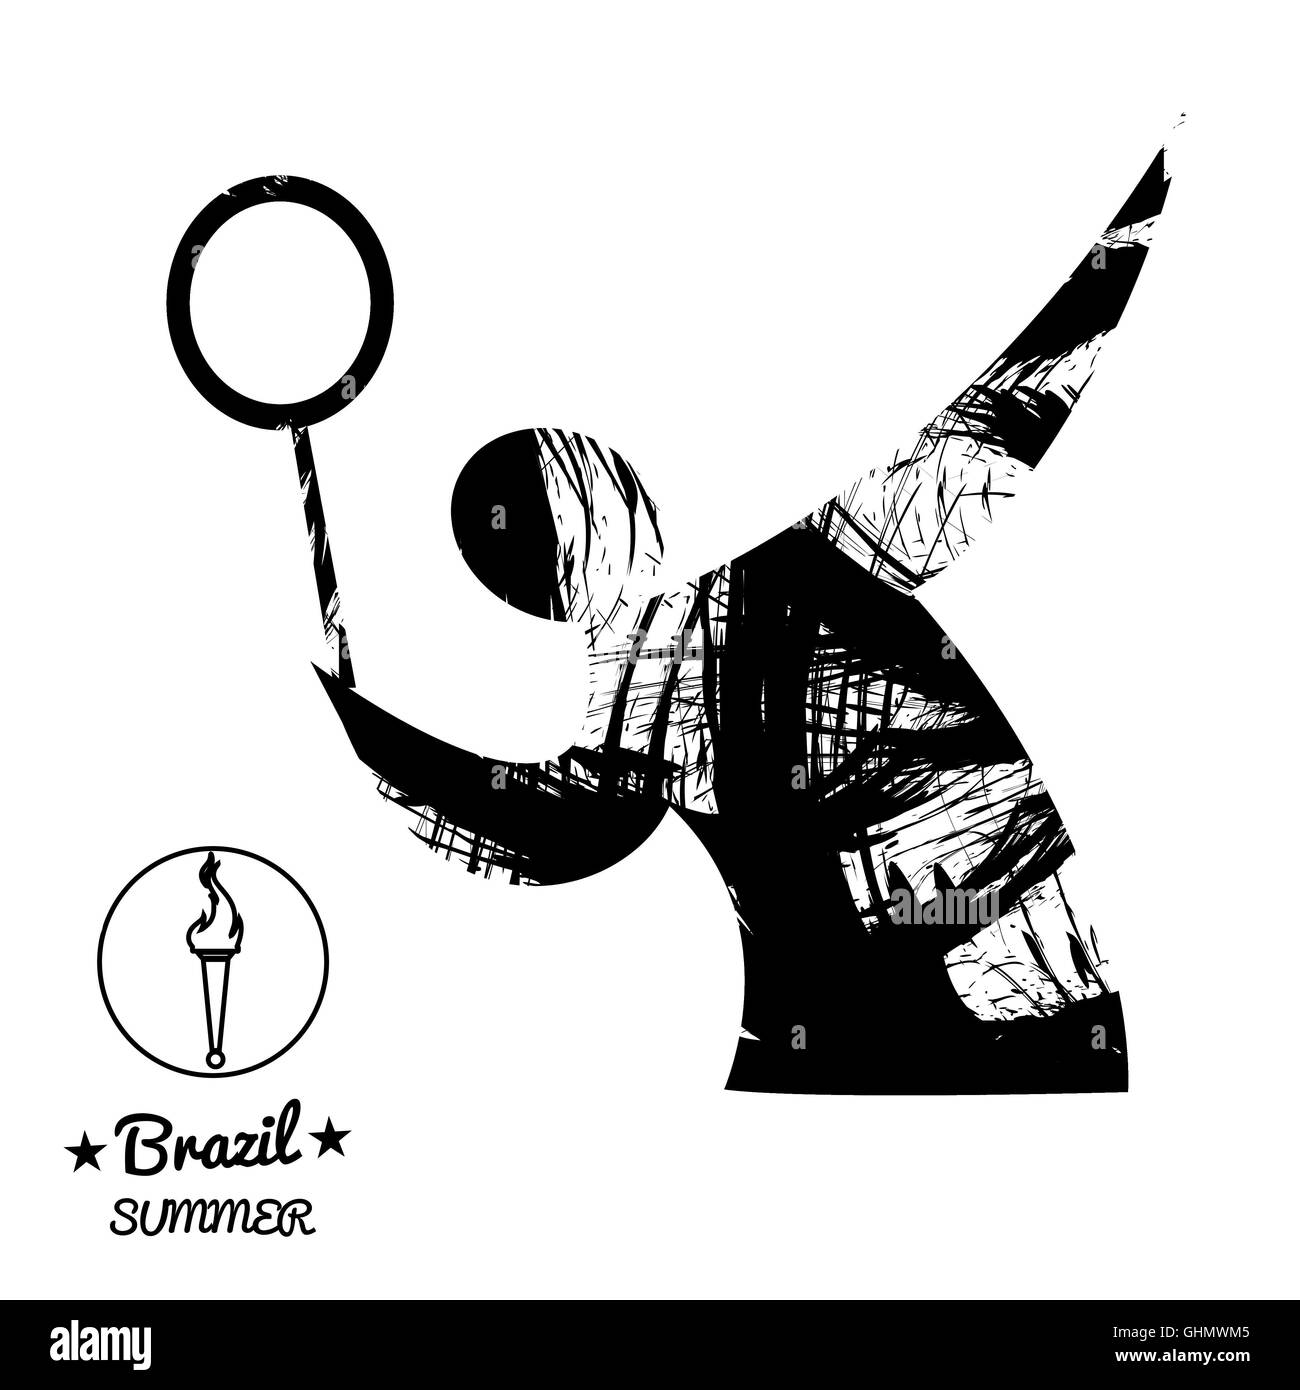 Brazil summer sport card with an abstract tennis player, in black outlines. Digital vector image Stock Photo